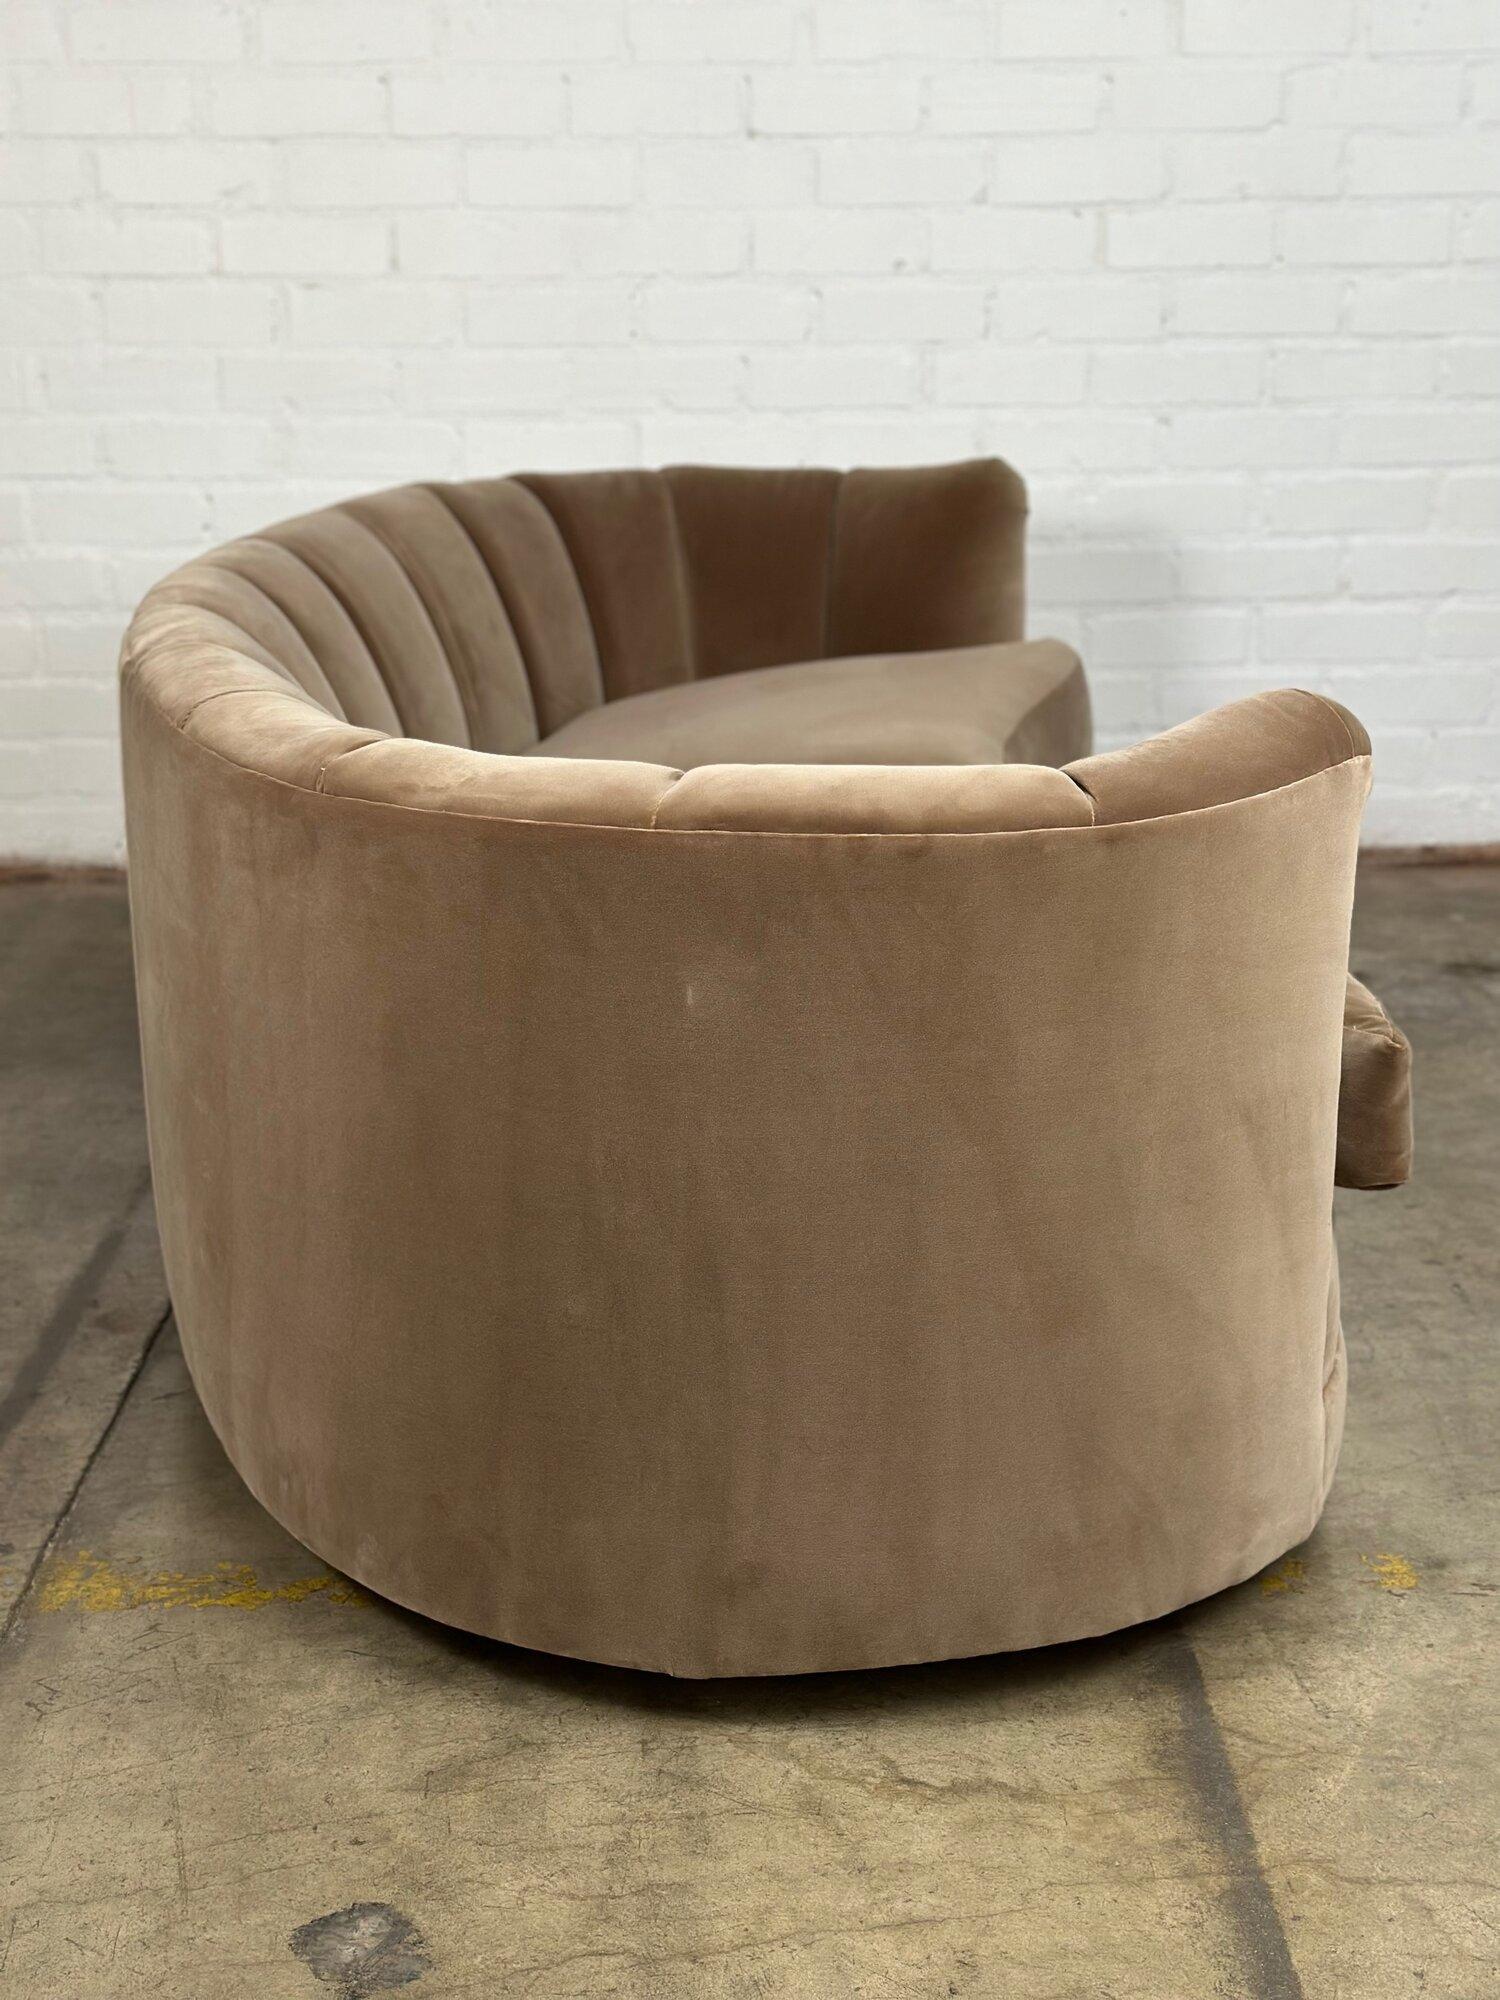 20th Century Art Deco Kidney Sofa with Channel Back